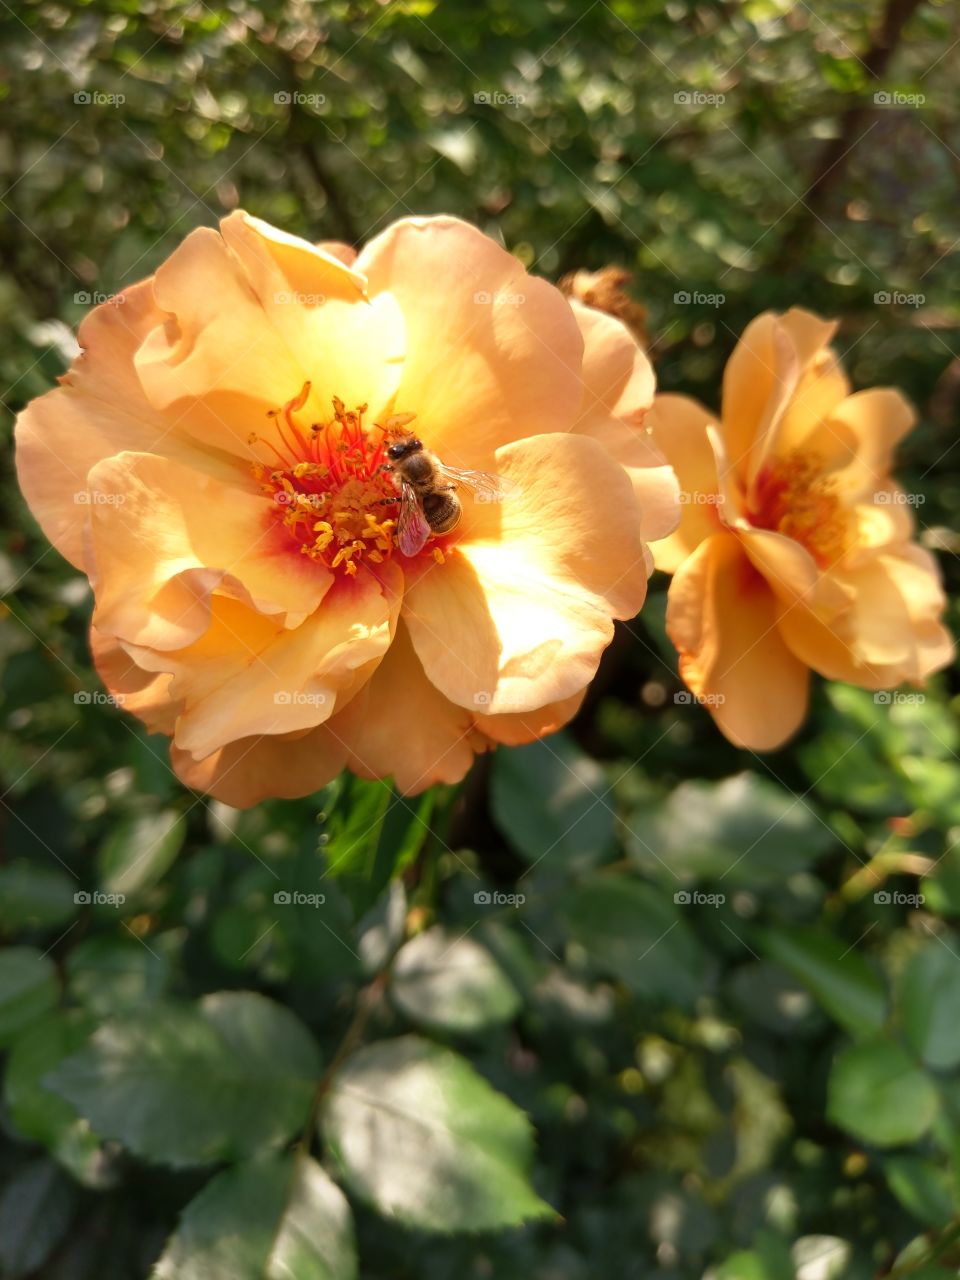 Flower with Bee